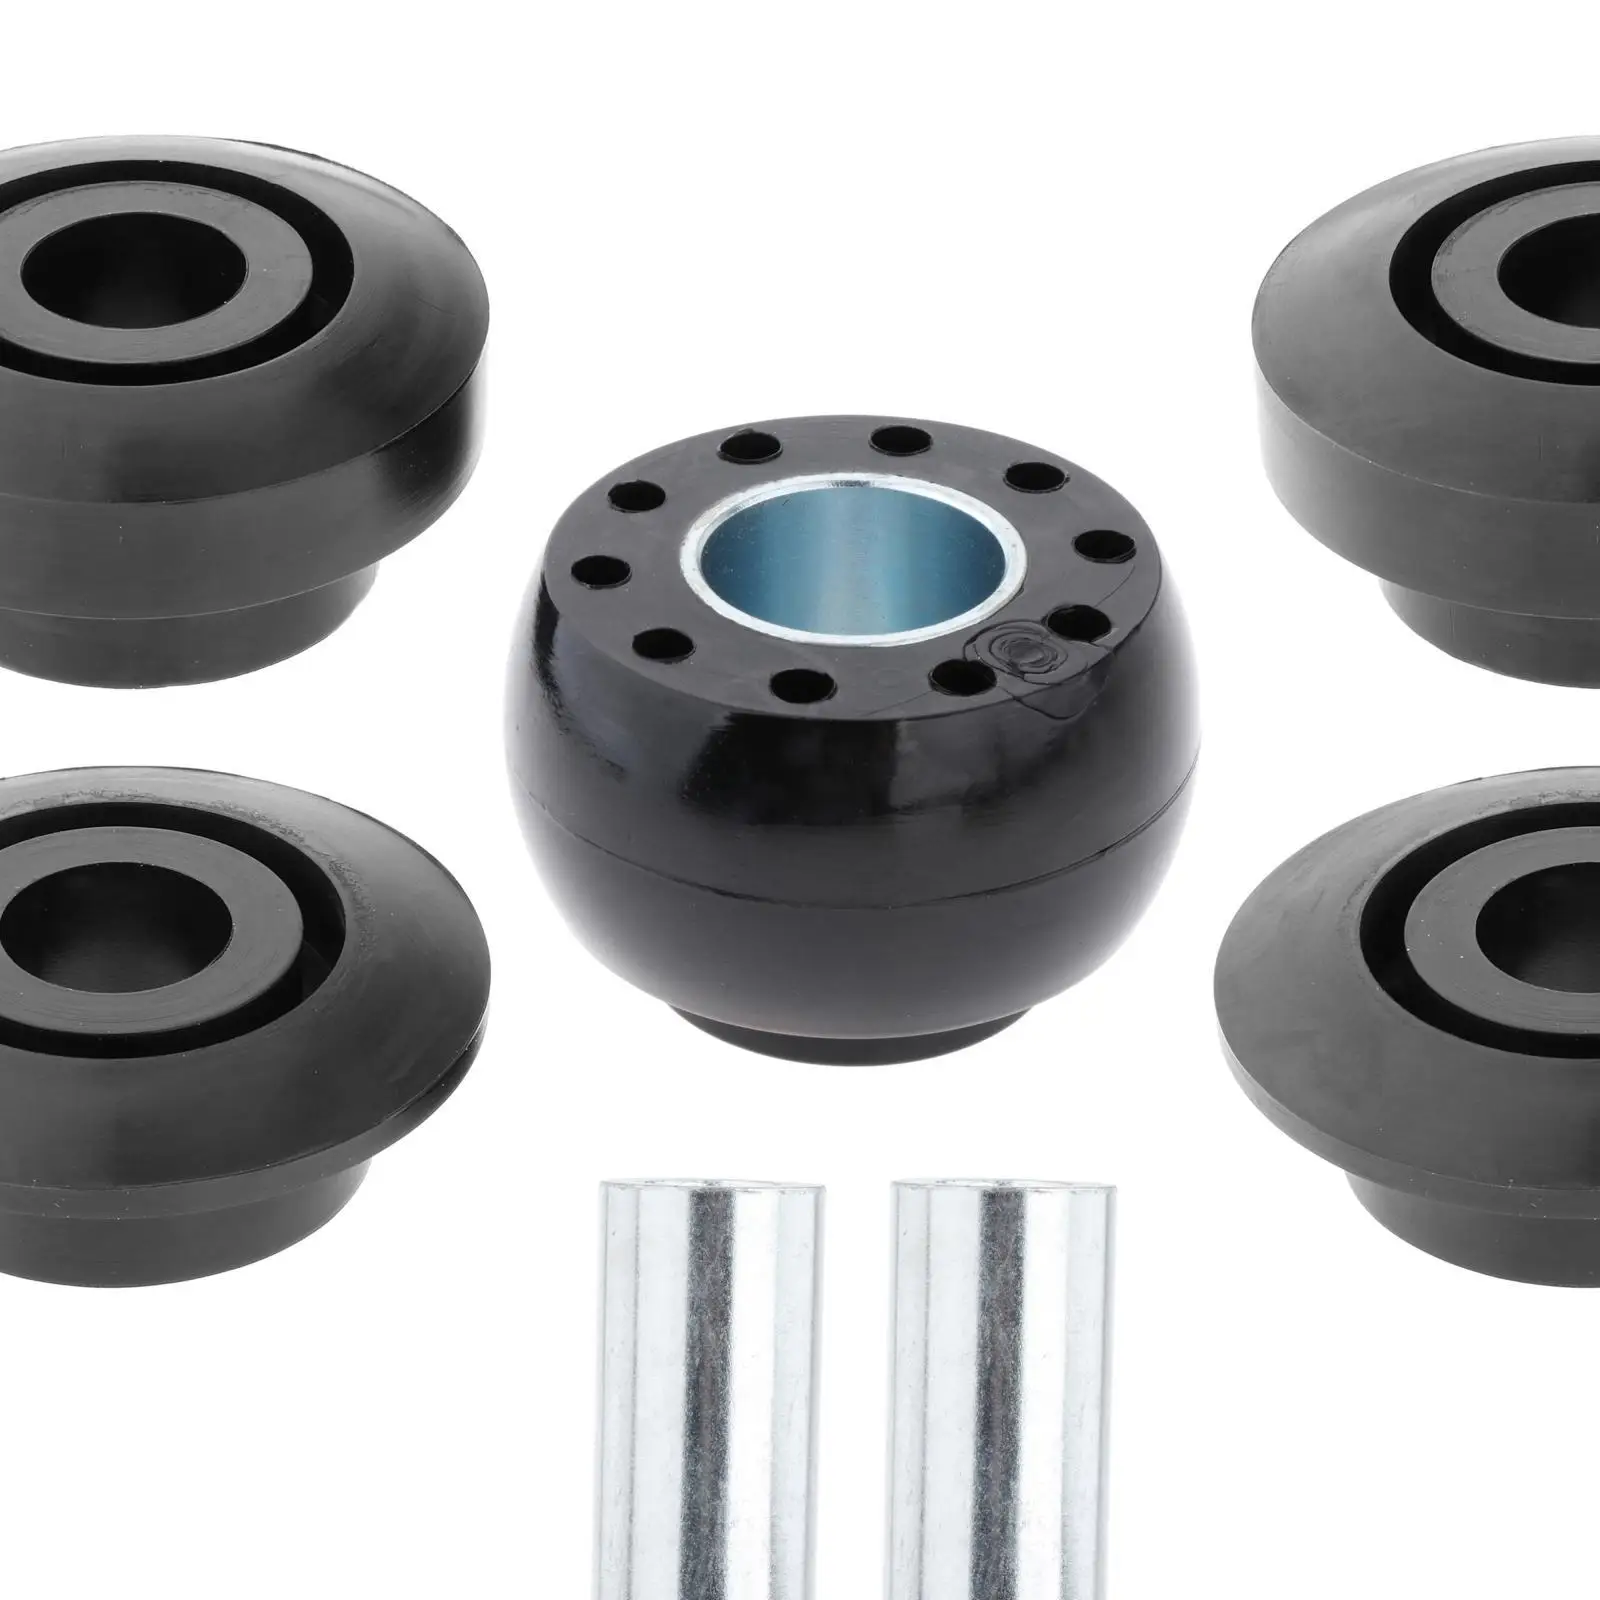 Solid Rear Differential Mount Bushings KDT911 Fit for 350Z 370Z G35 G37